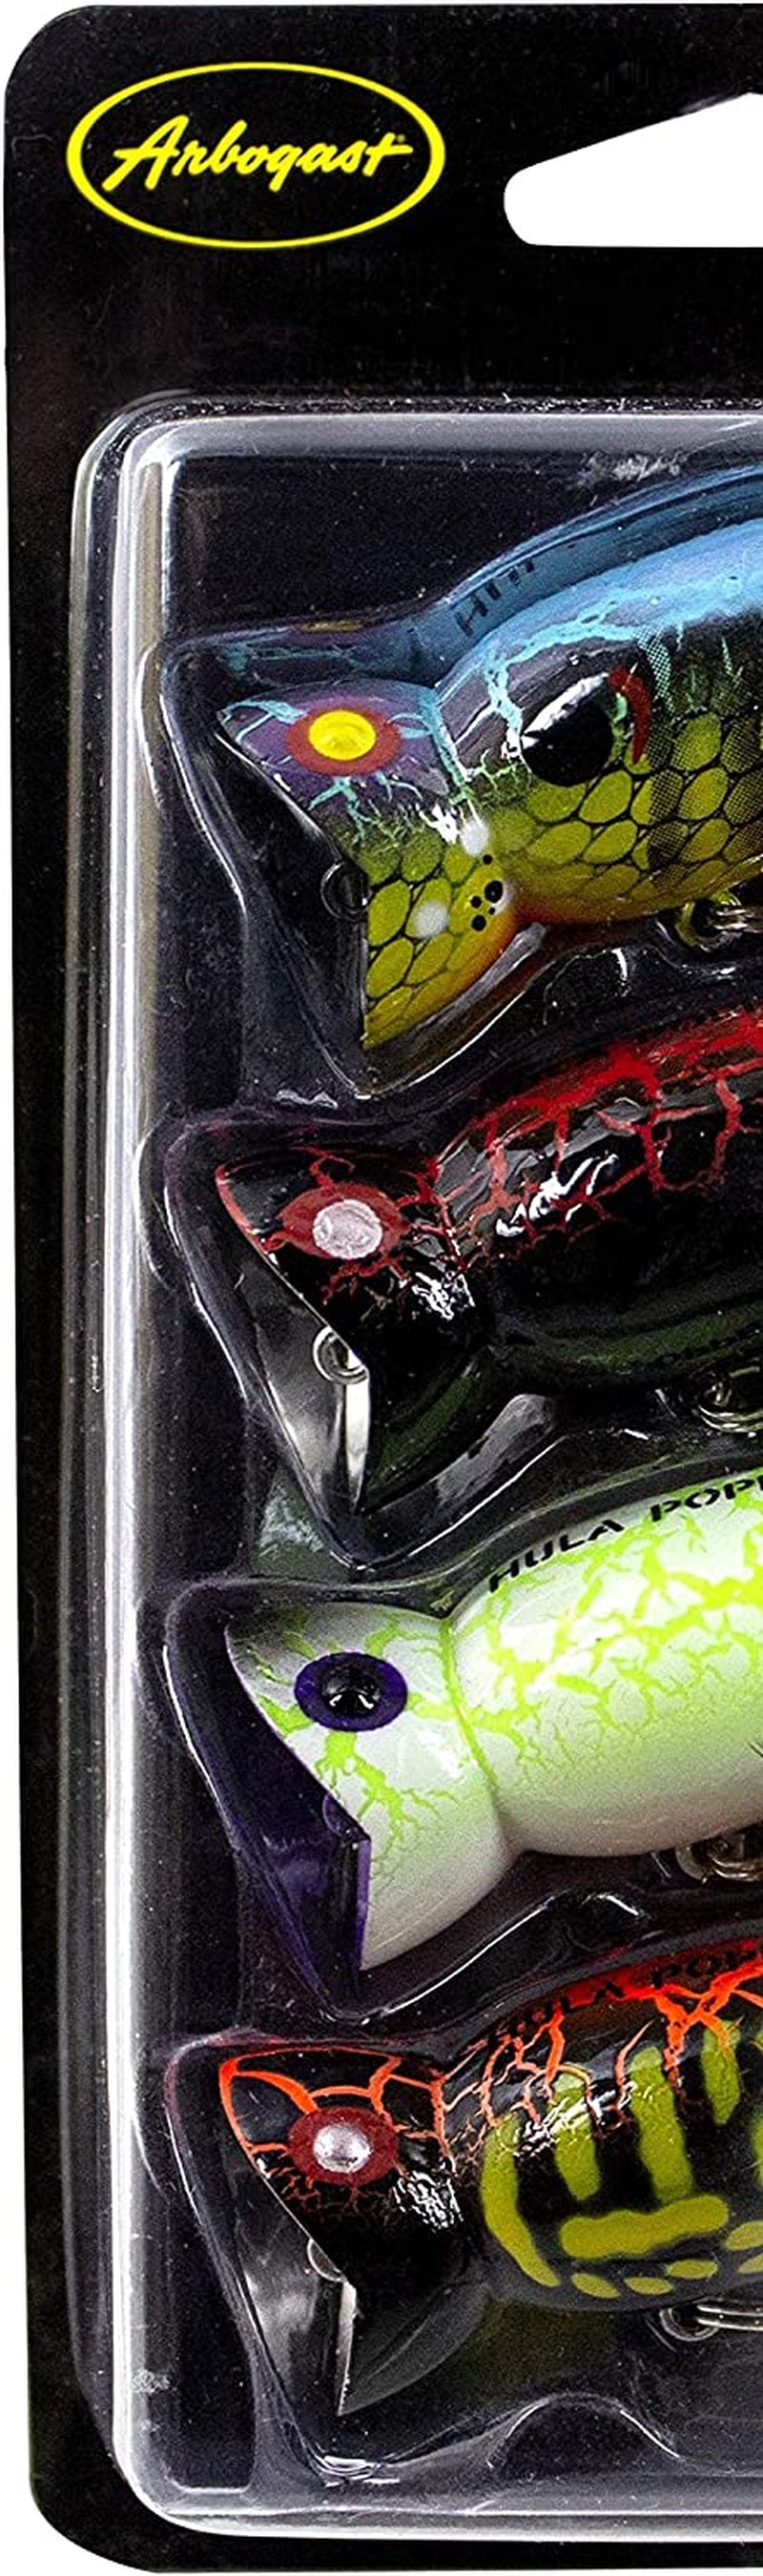 Arbogast Hula Popper 2.0 Topwater Fishing Lure with Feathered Treble Hook and Crackle Pattern Body Sporting Goods > Outdoor Recreation > Fishing > Fishing Tackle > Fishing Baits & Lures Pradco Outdoor Brands   